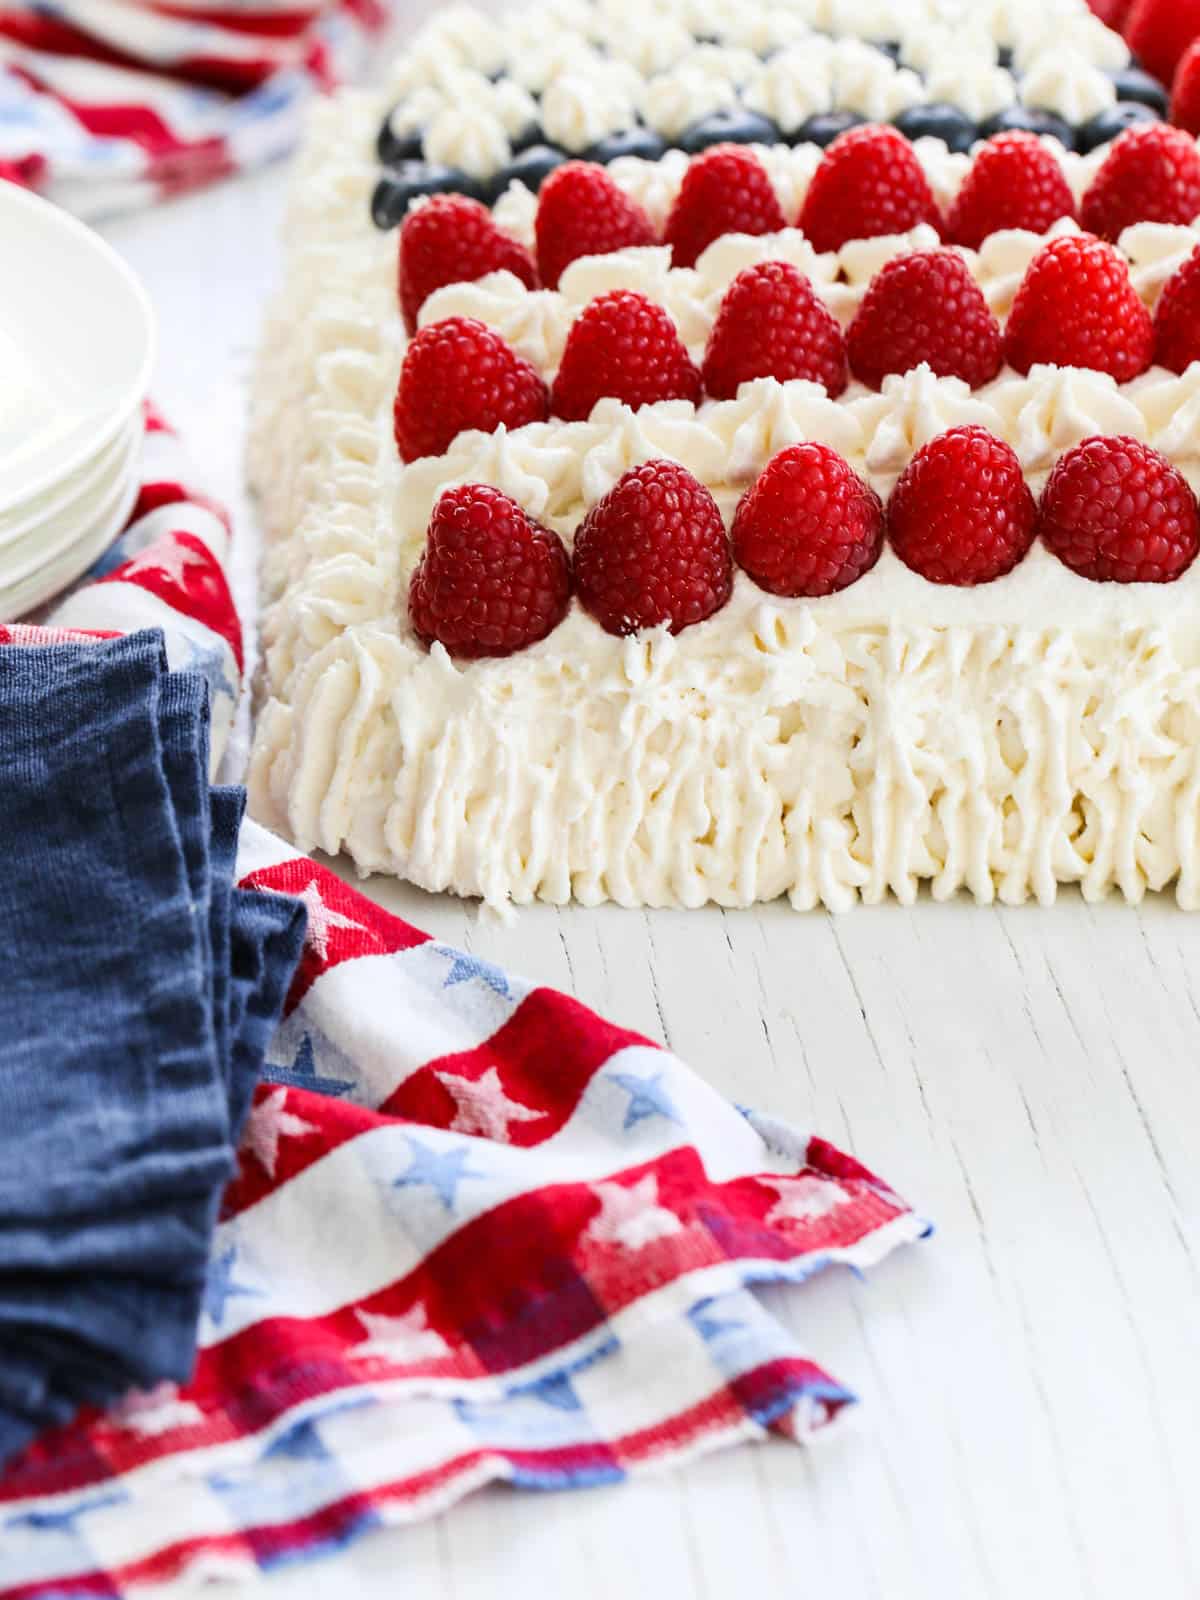 The corner of a white frosted cake decorated with raspberries with a patriotic towel. 